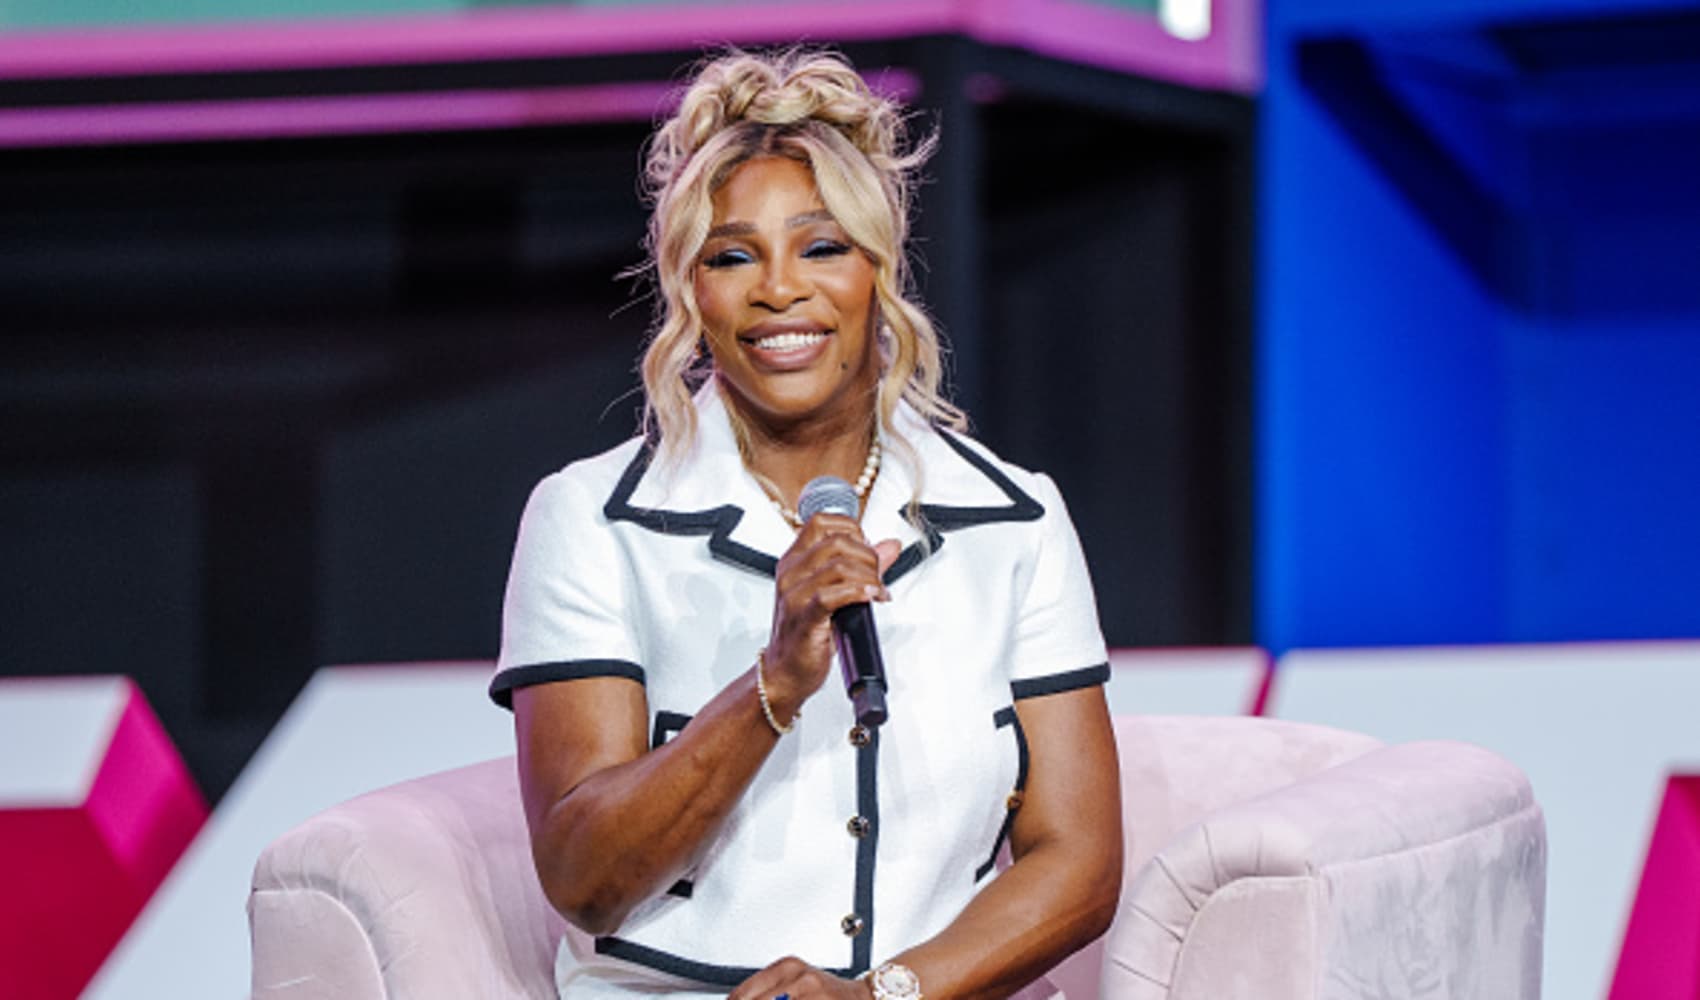 Serena Williams tried to deposit her first $1 million check at a drive-thru ATM: ‘If I didn't win, I wasn't thinking'